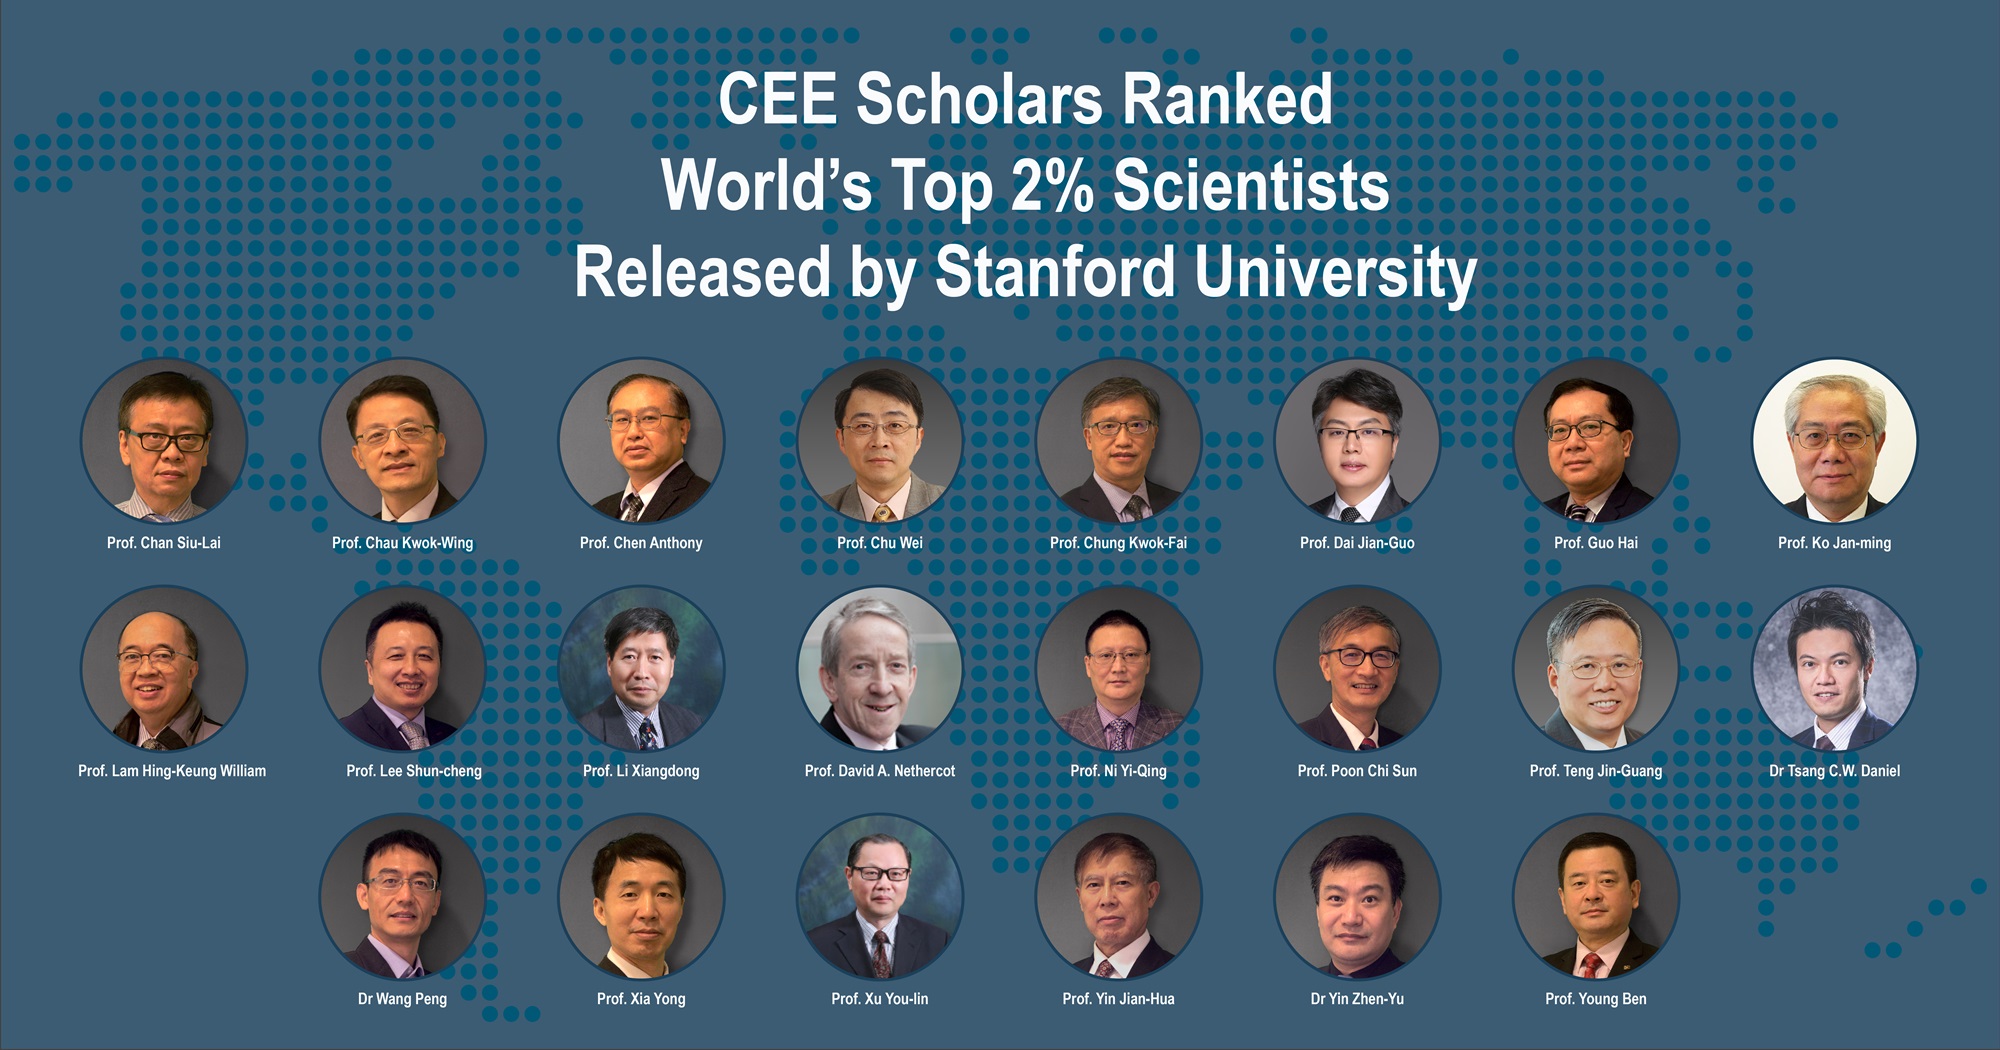 22 CEE Scholars Ranked World’s Top 2 Scientists Released by Stanford